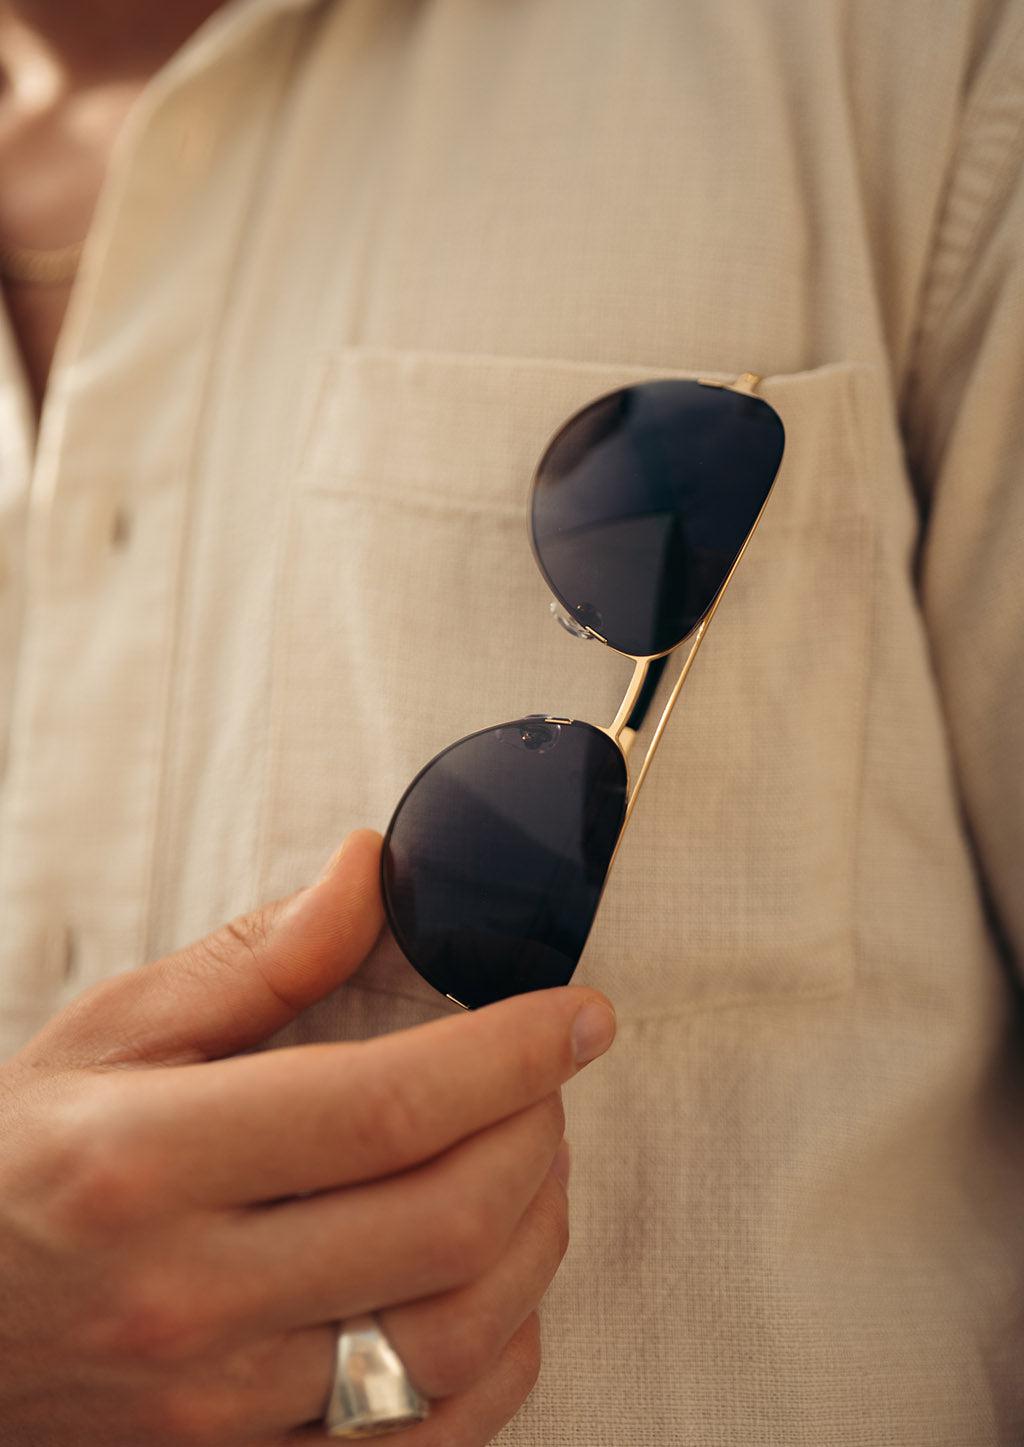 Titan - Titanium Aviator Sunglasses V2 - 24K Gold Plated with real gold. Showing of some more details.